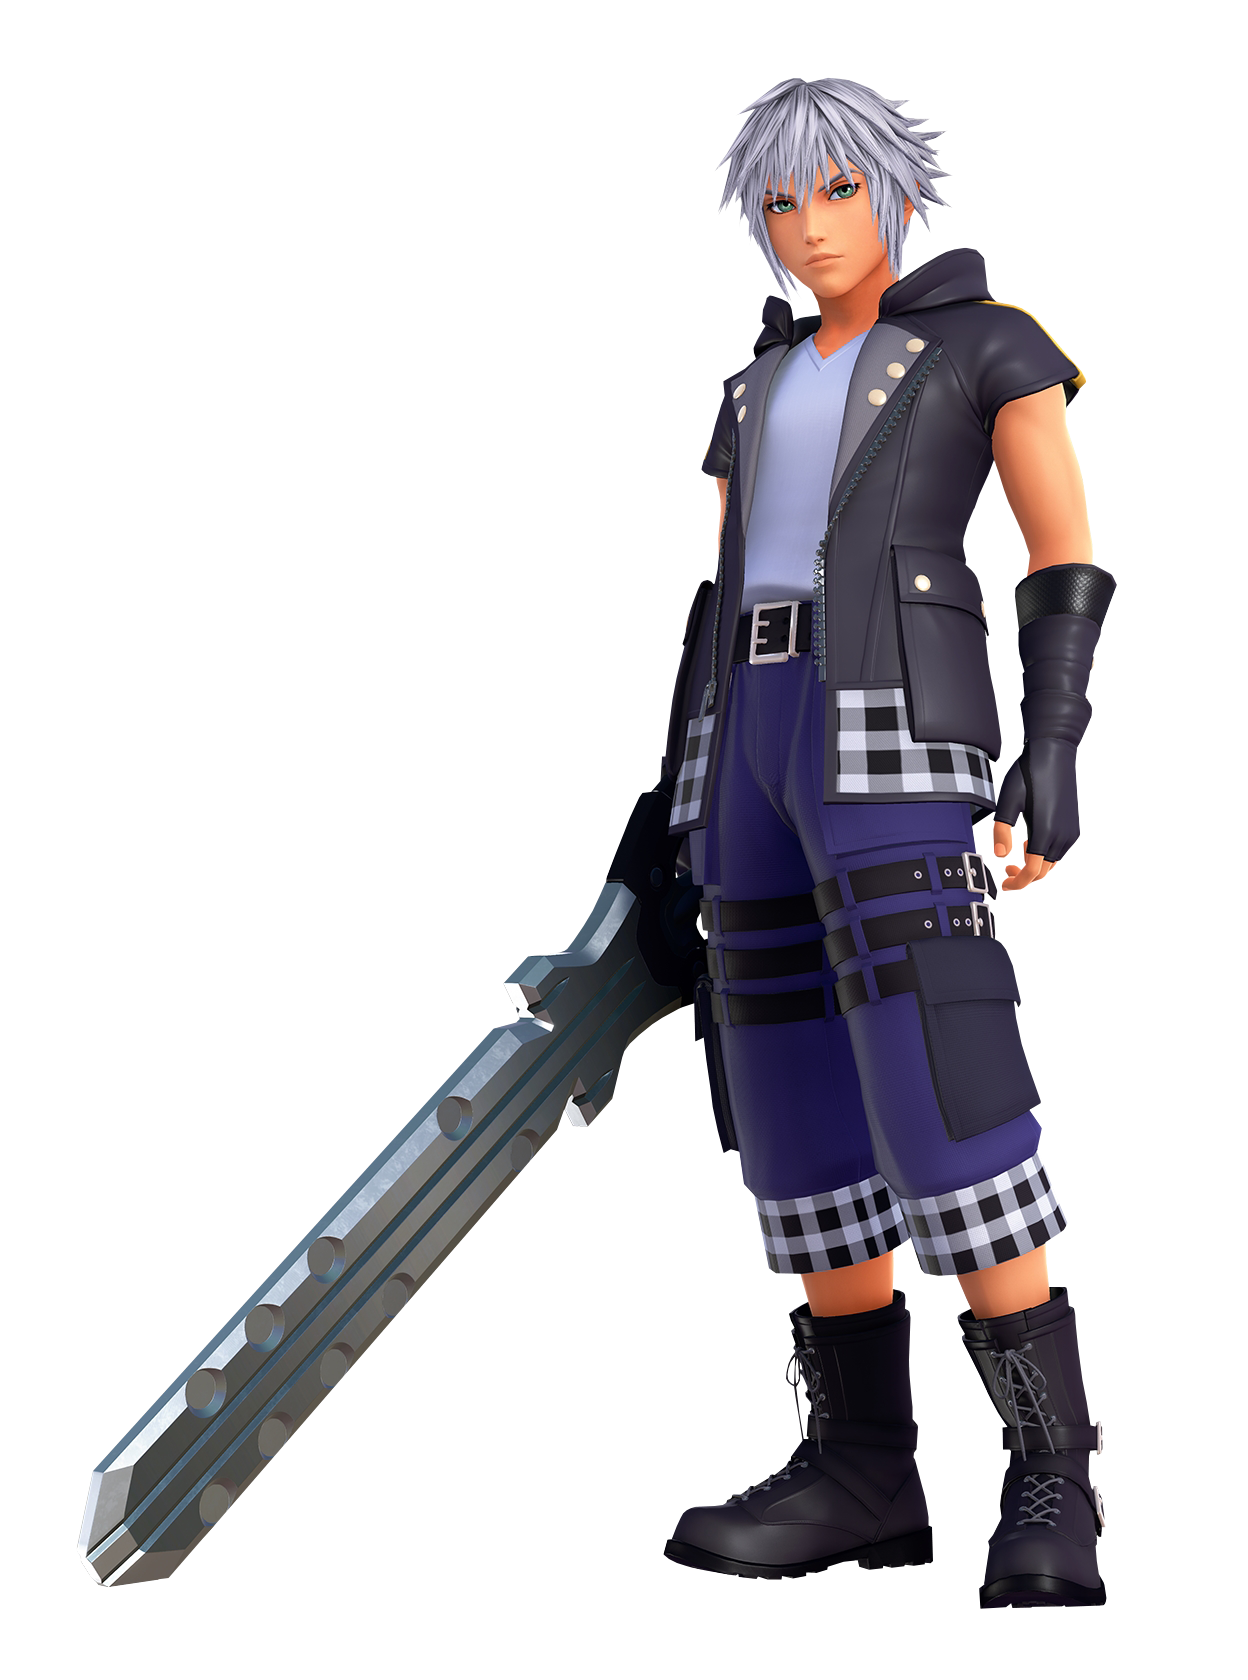 Why do so many Xenoblade fans say you want to find out who Riku 